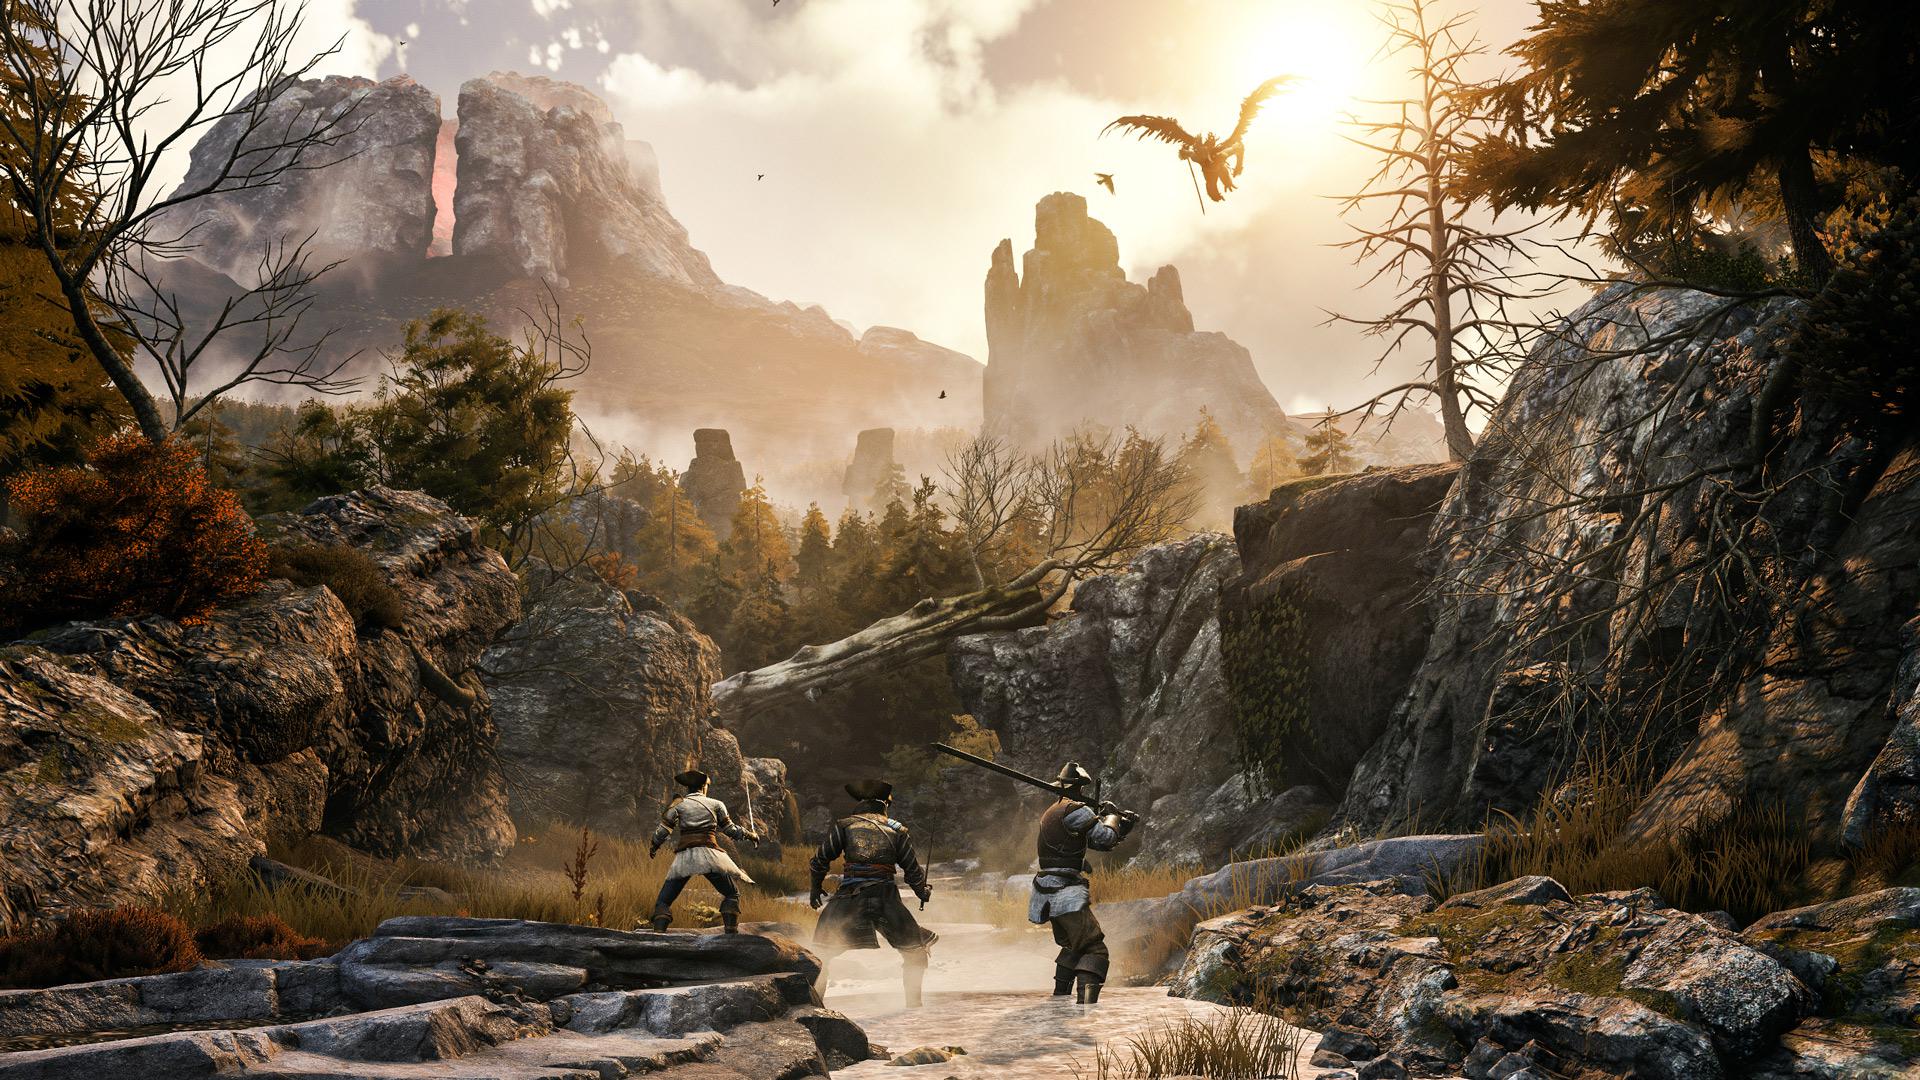 Learn About the GreedFall Story